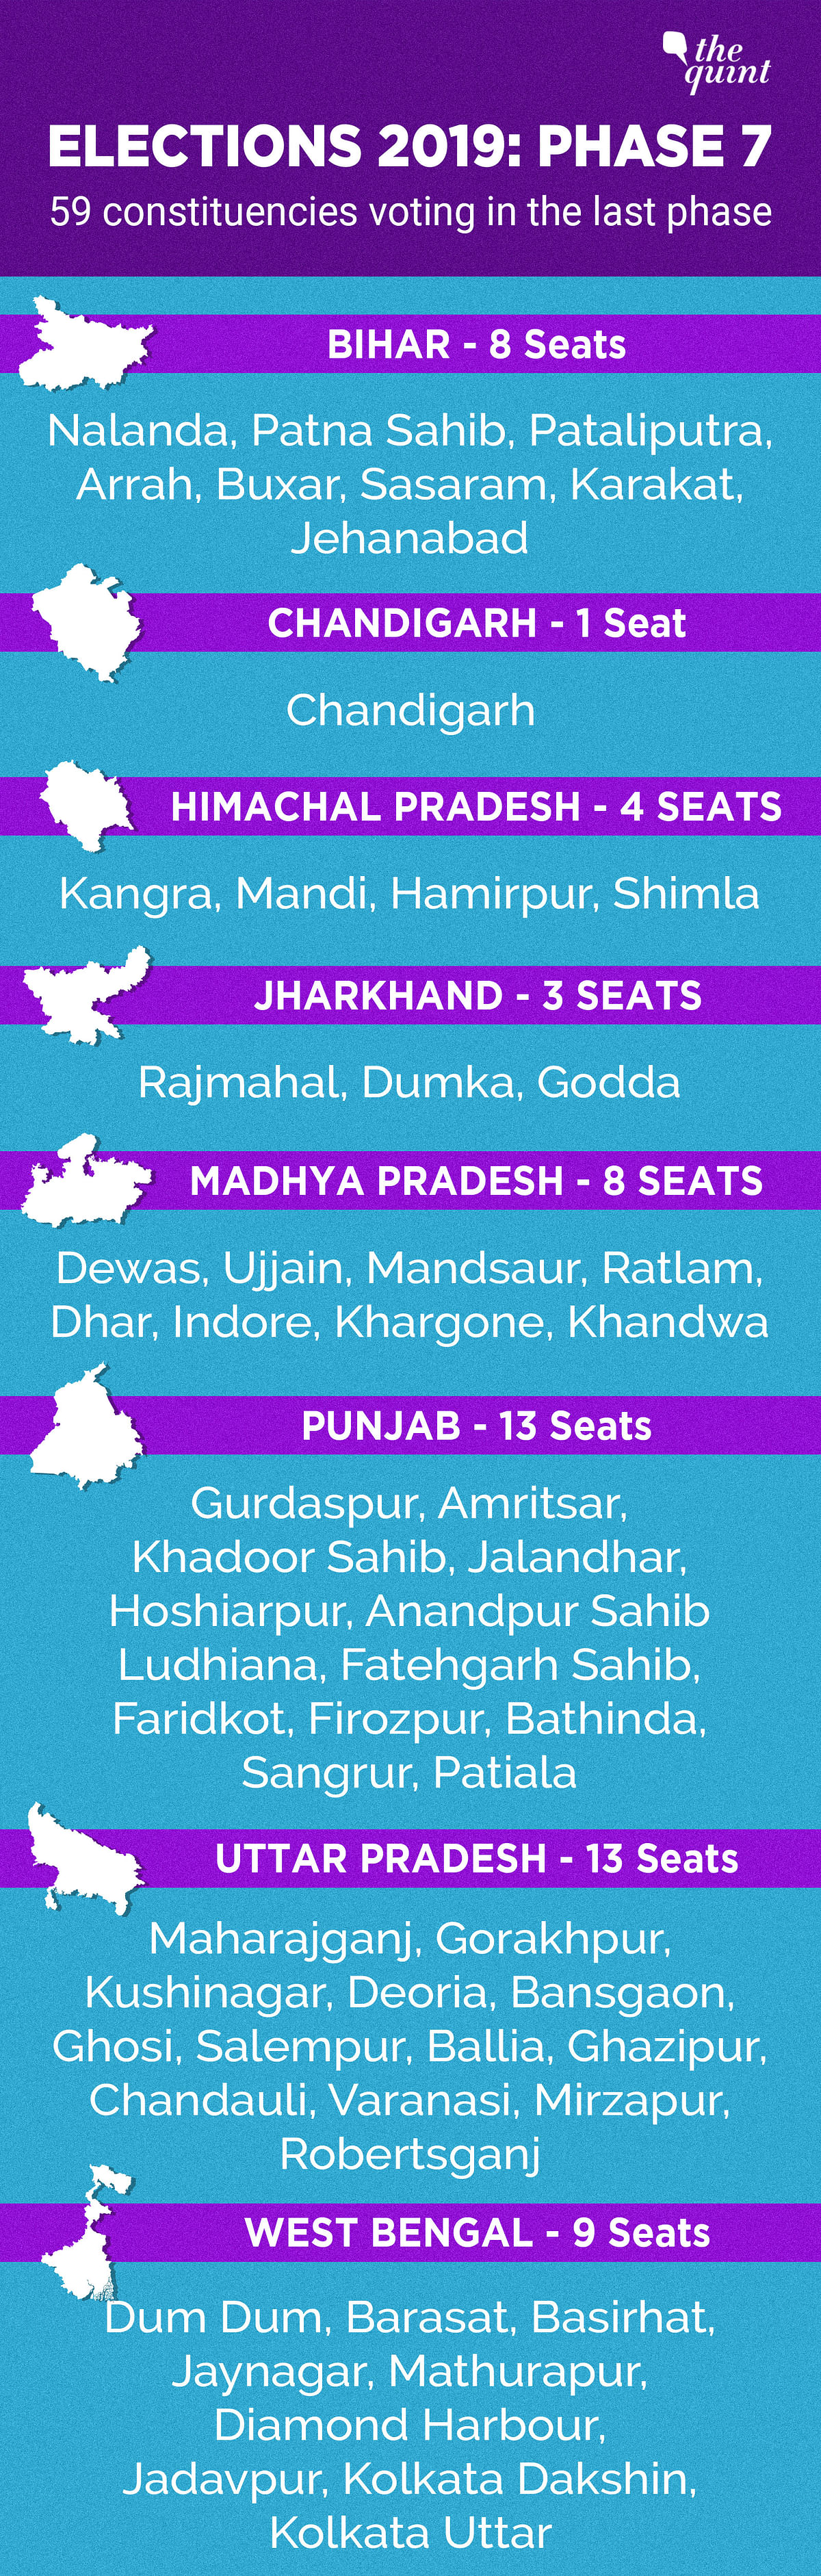 Polling will be held in Varanasi, where Prime Minister Narendra Modi is fighting to retain his seat.